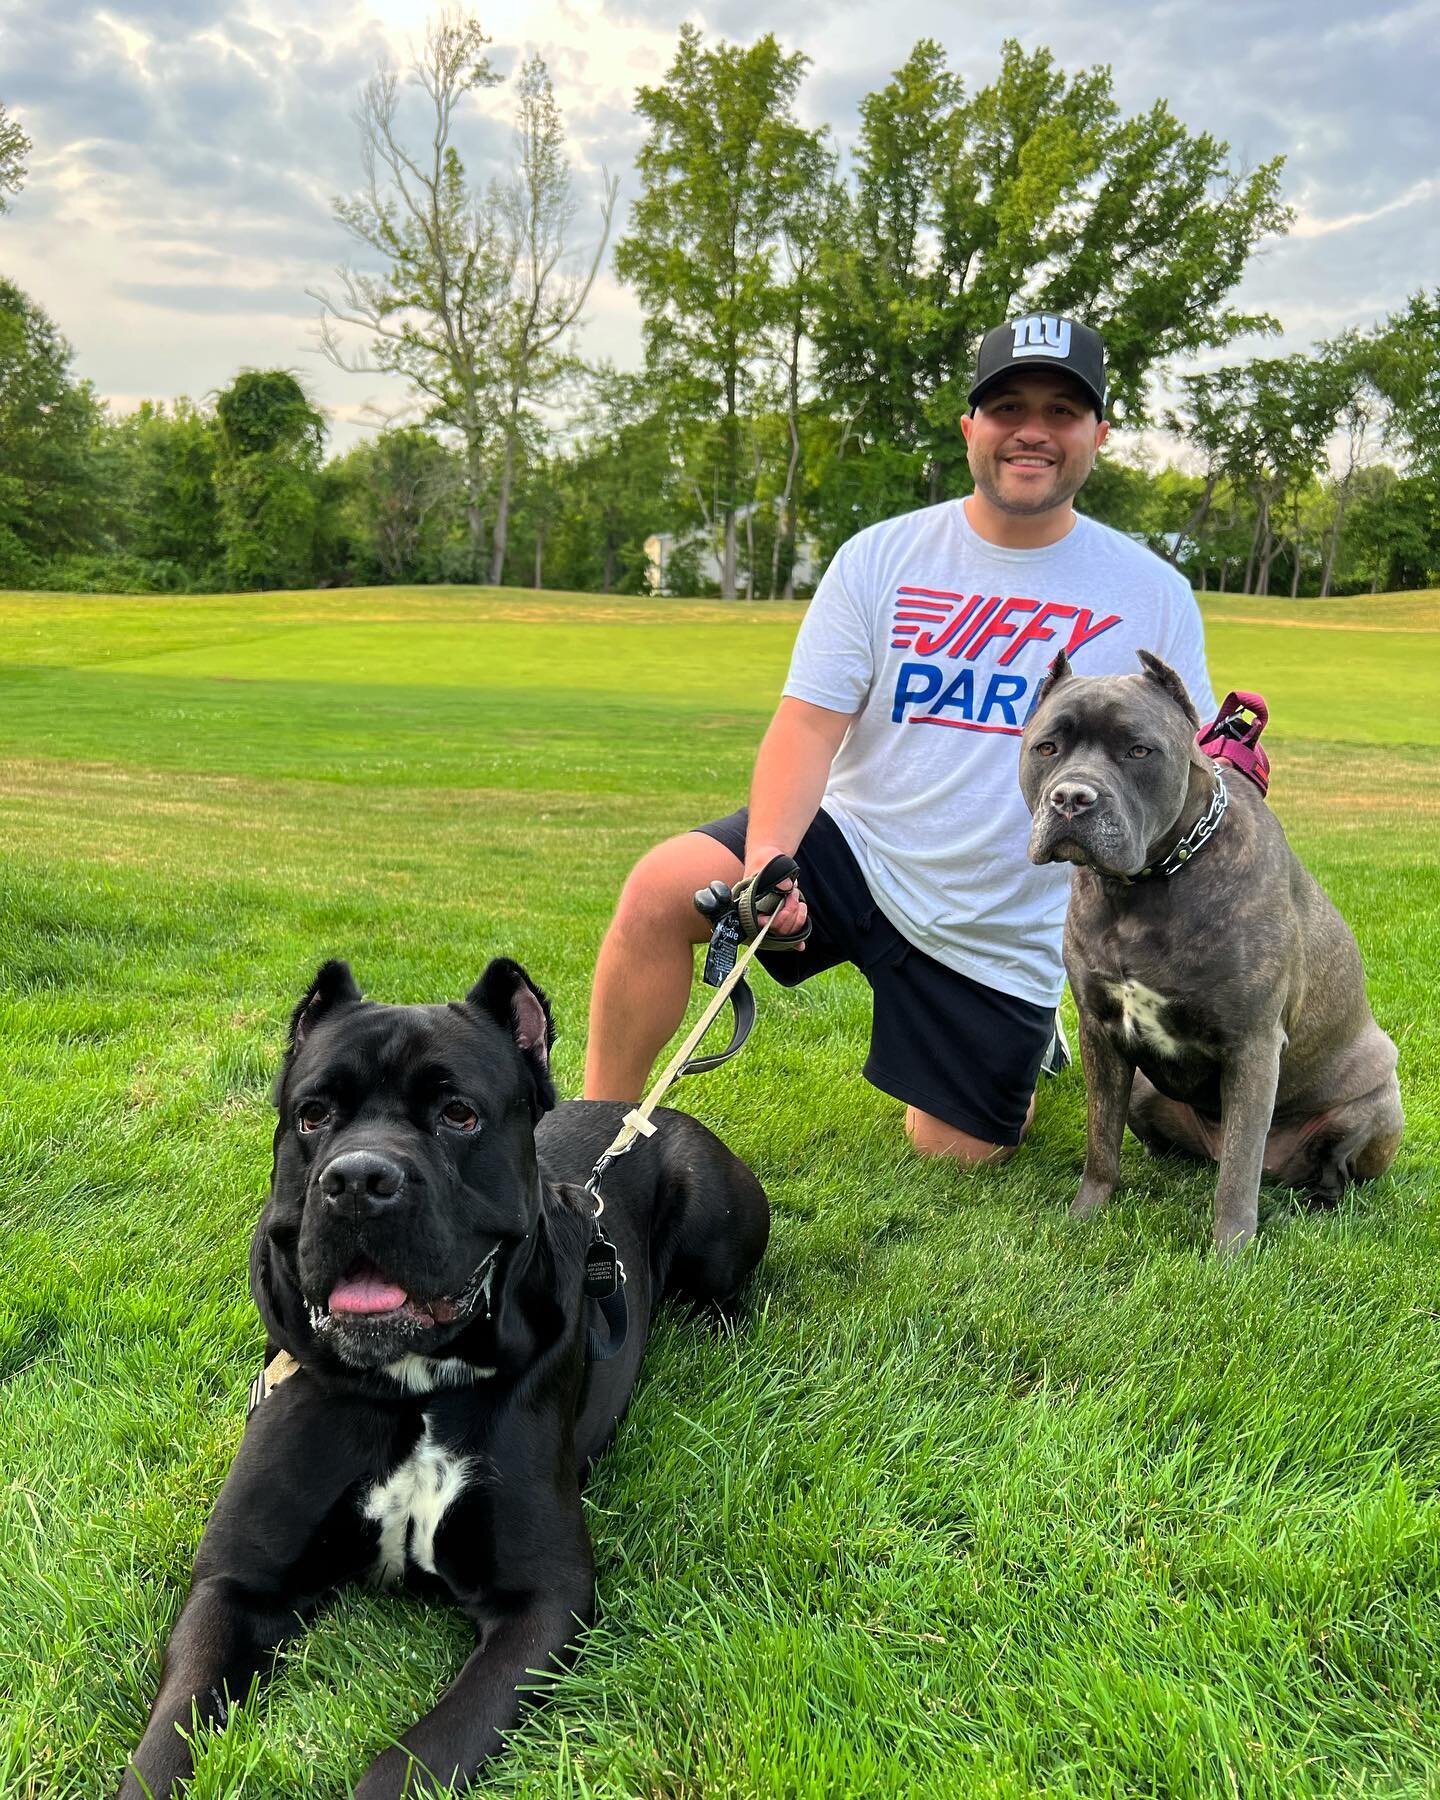 Happy Father&rsquo;s Day to all the human + dog Dads out there‼️
.
.
.
.
Dog Treat Bribery: @amorette_luchia 
📸: @kikicaris 
.
.
.
.
#Ledg #Pow #DJCam #CaneCorso #DogDad #Montepulciano #Mirabella #SweetiePie #Dog #Puppy #JiffyPark #Seinfeld #NYG